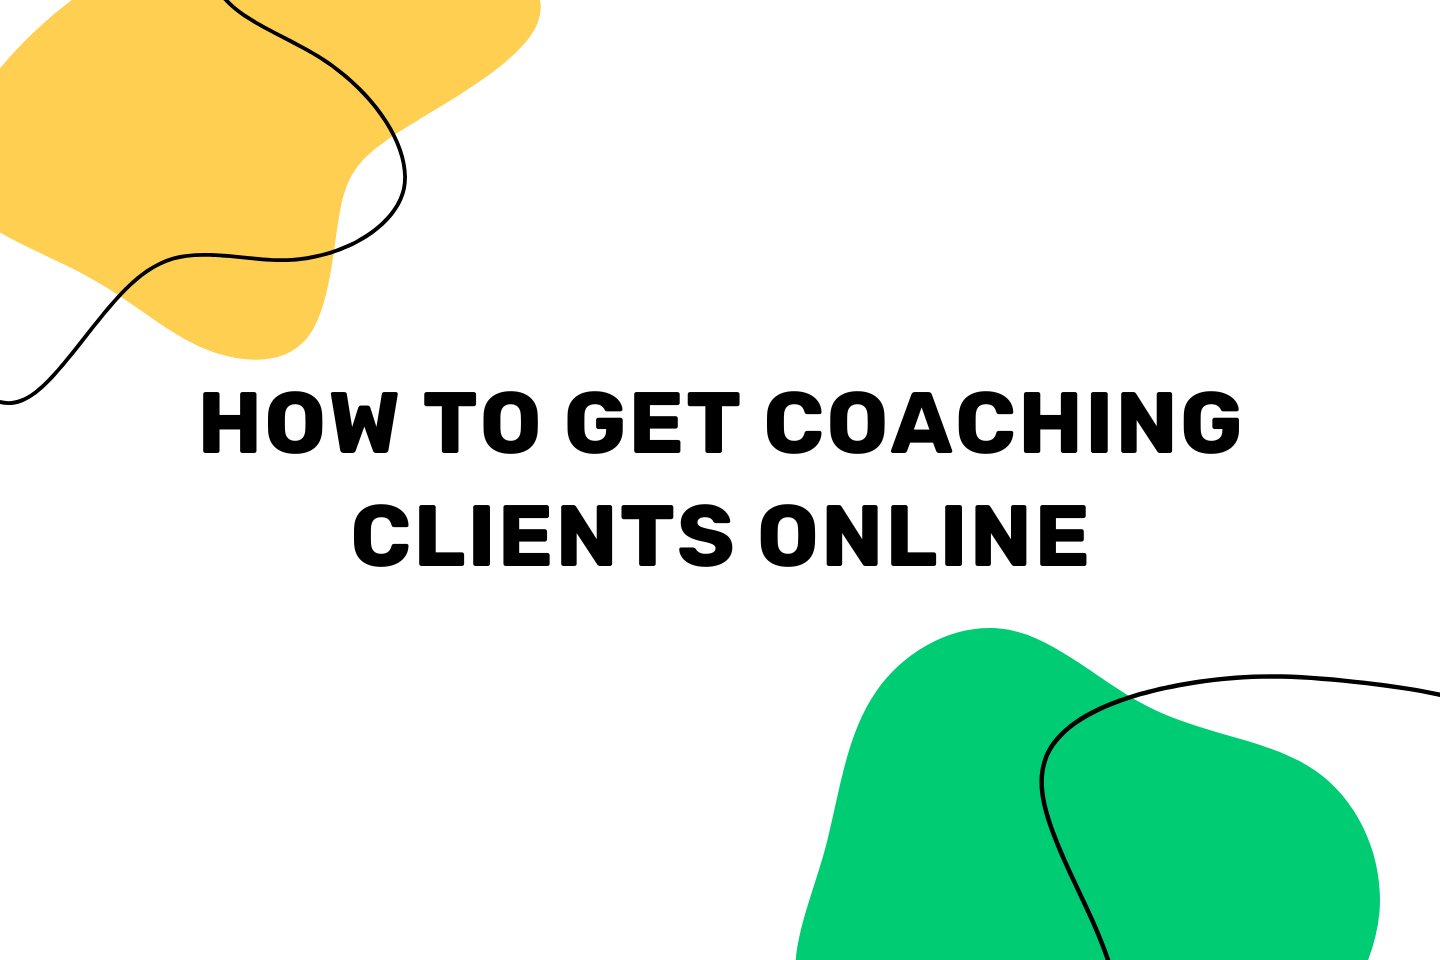 How to Get Coaching Clients Online